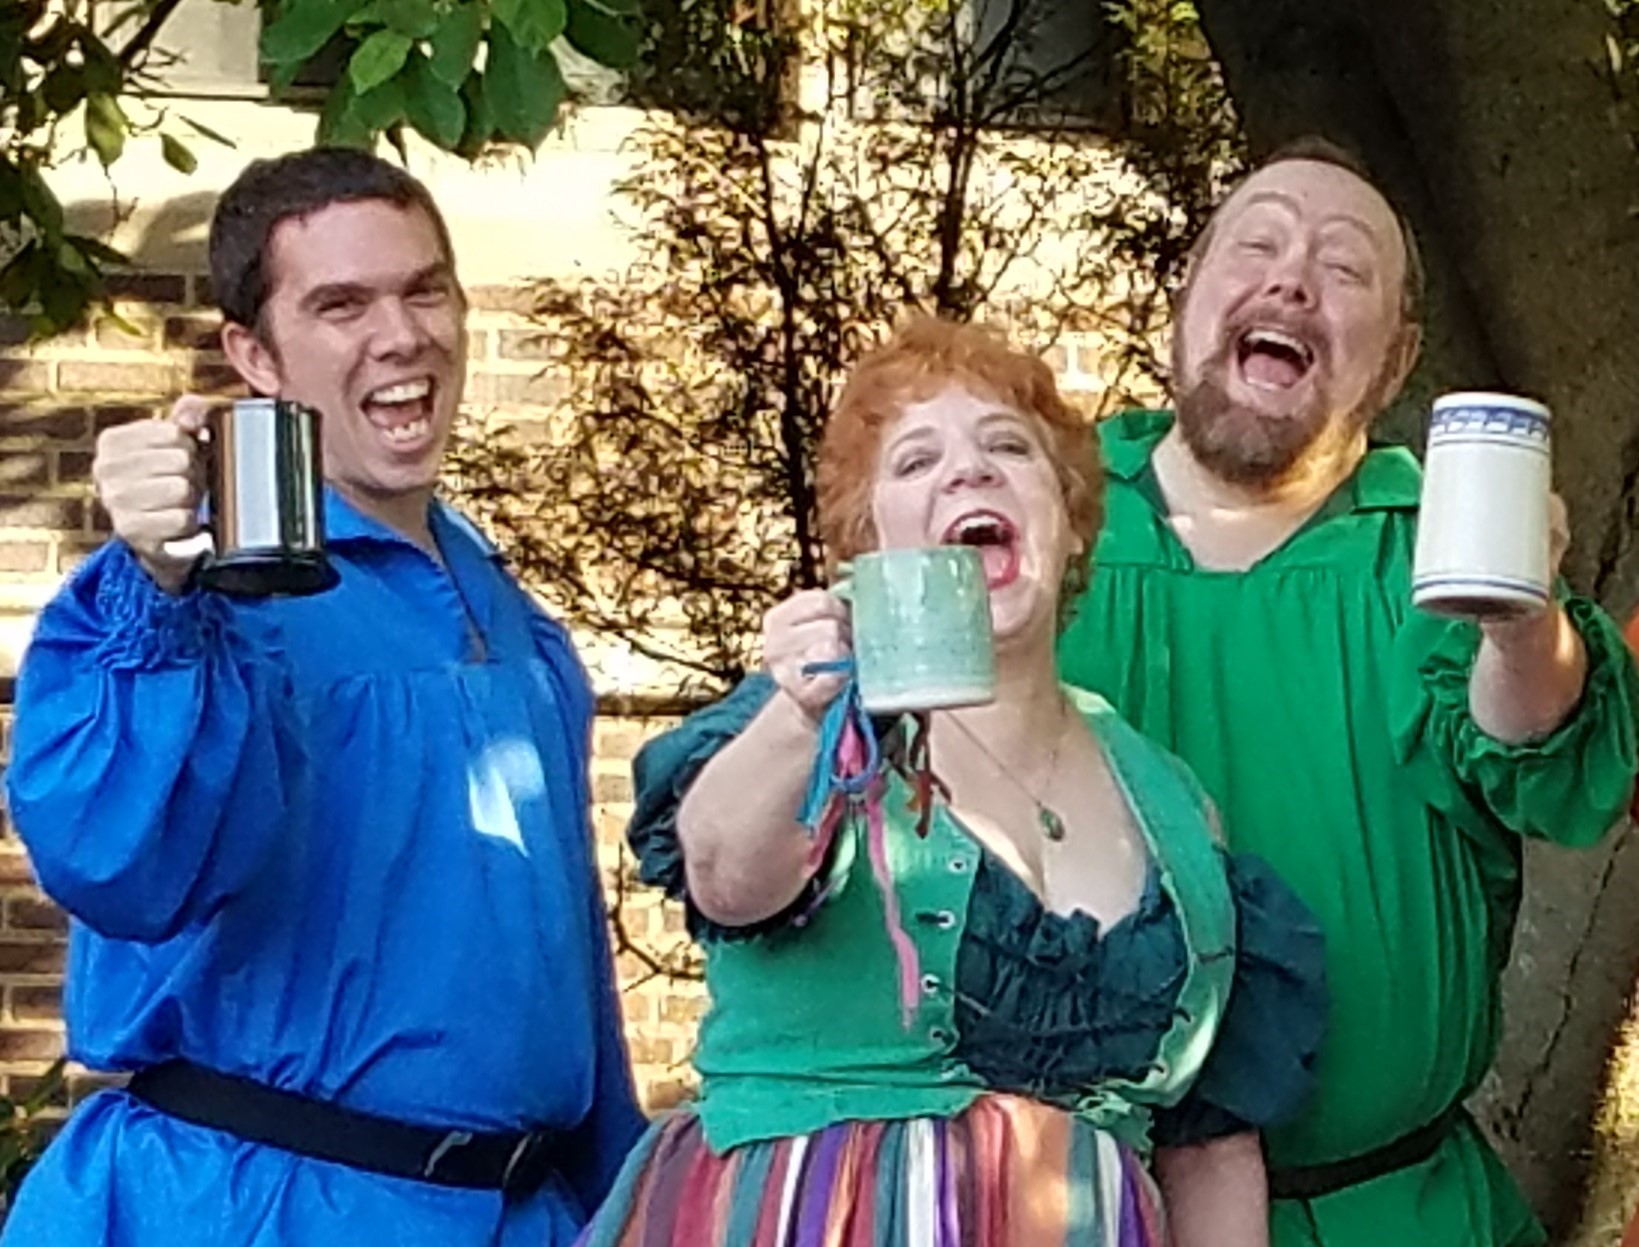 39th Annual "A Canterbury Feast" - The one, The only, The Original Medieval-style Musical Comedy!